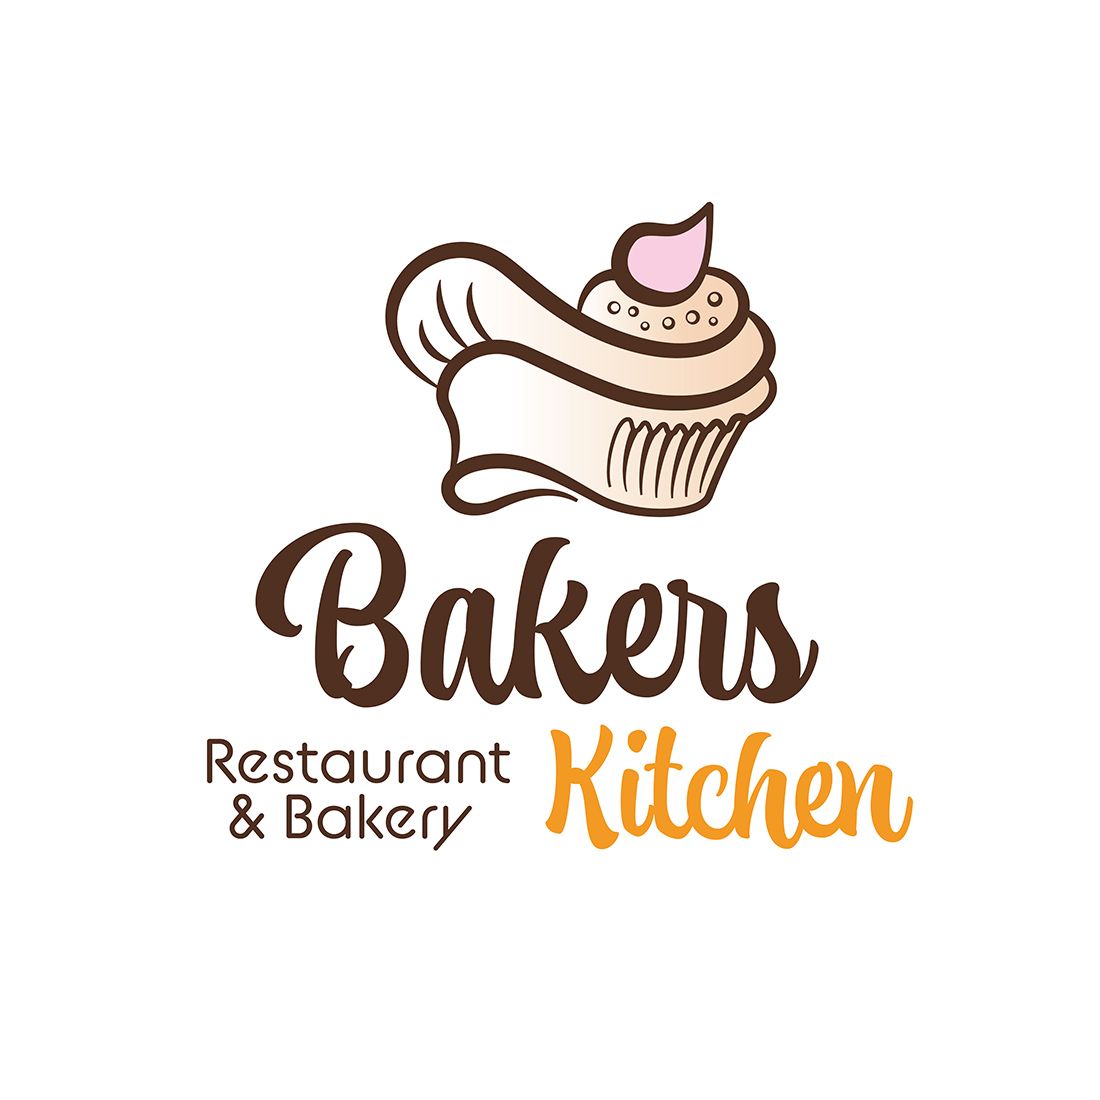 Bakers Kitchen Logo for your designs.